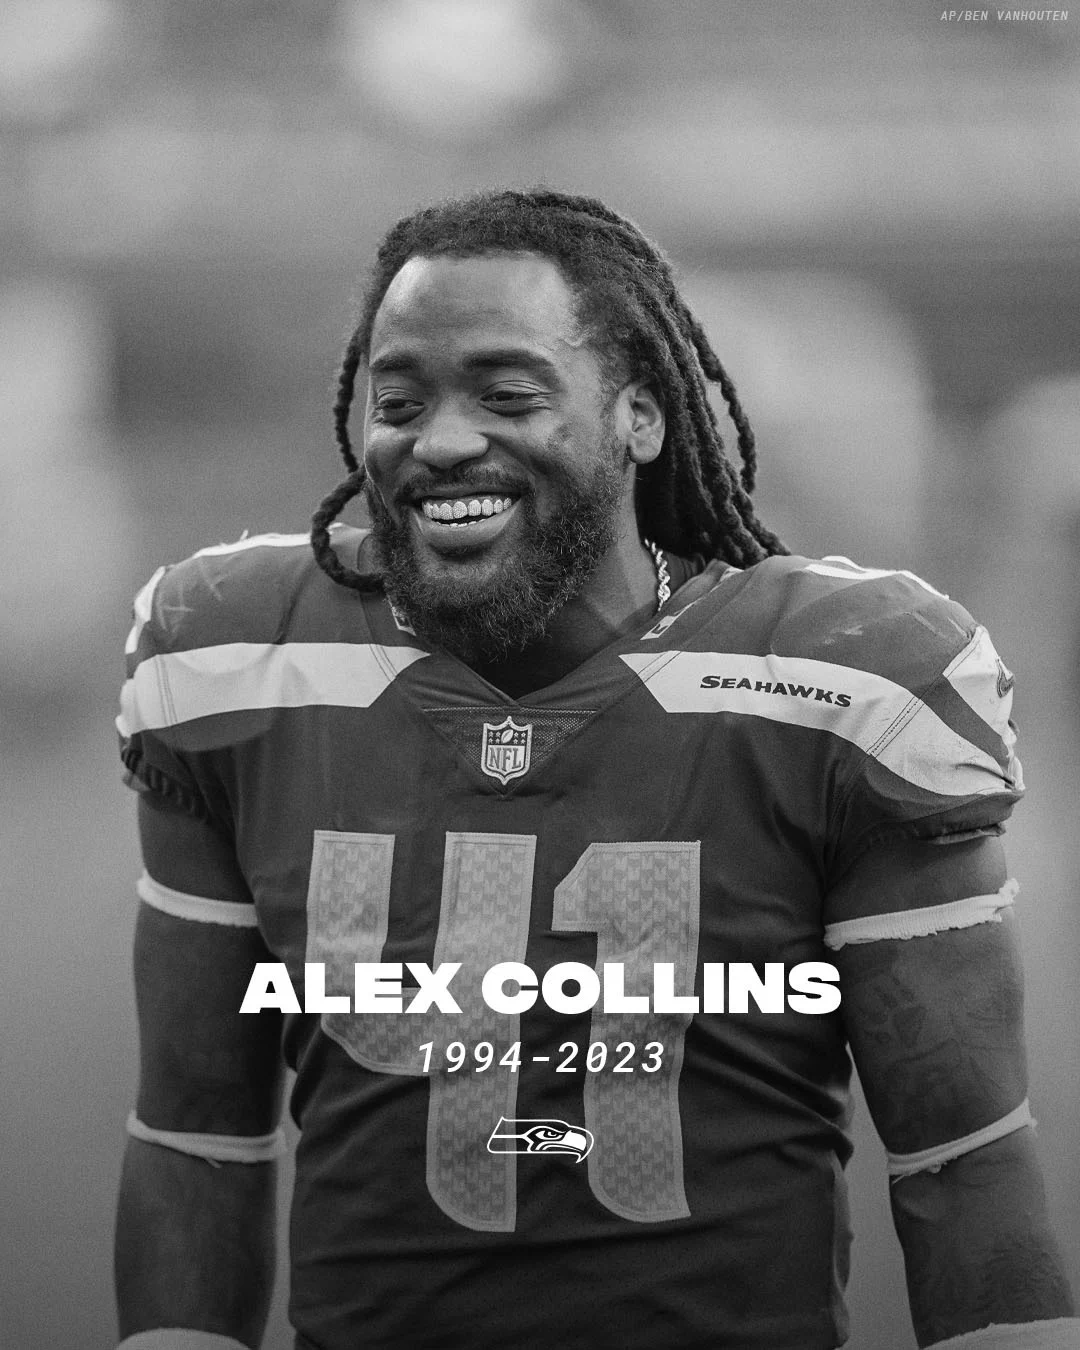 NFL Running Back Alex Collins, 28, passed away